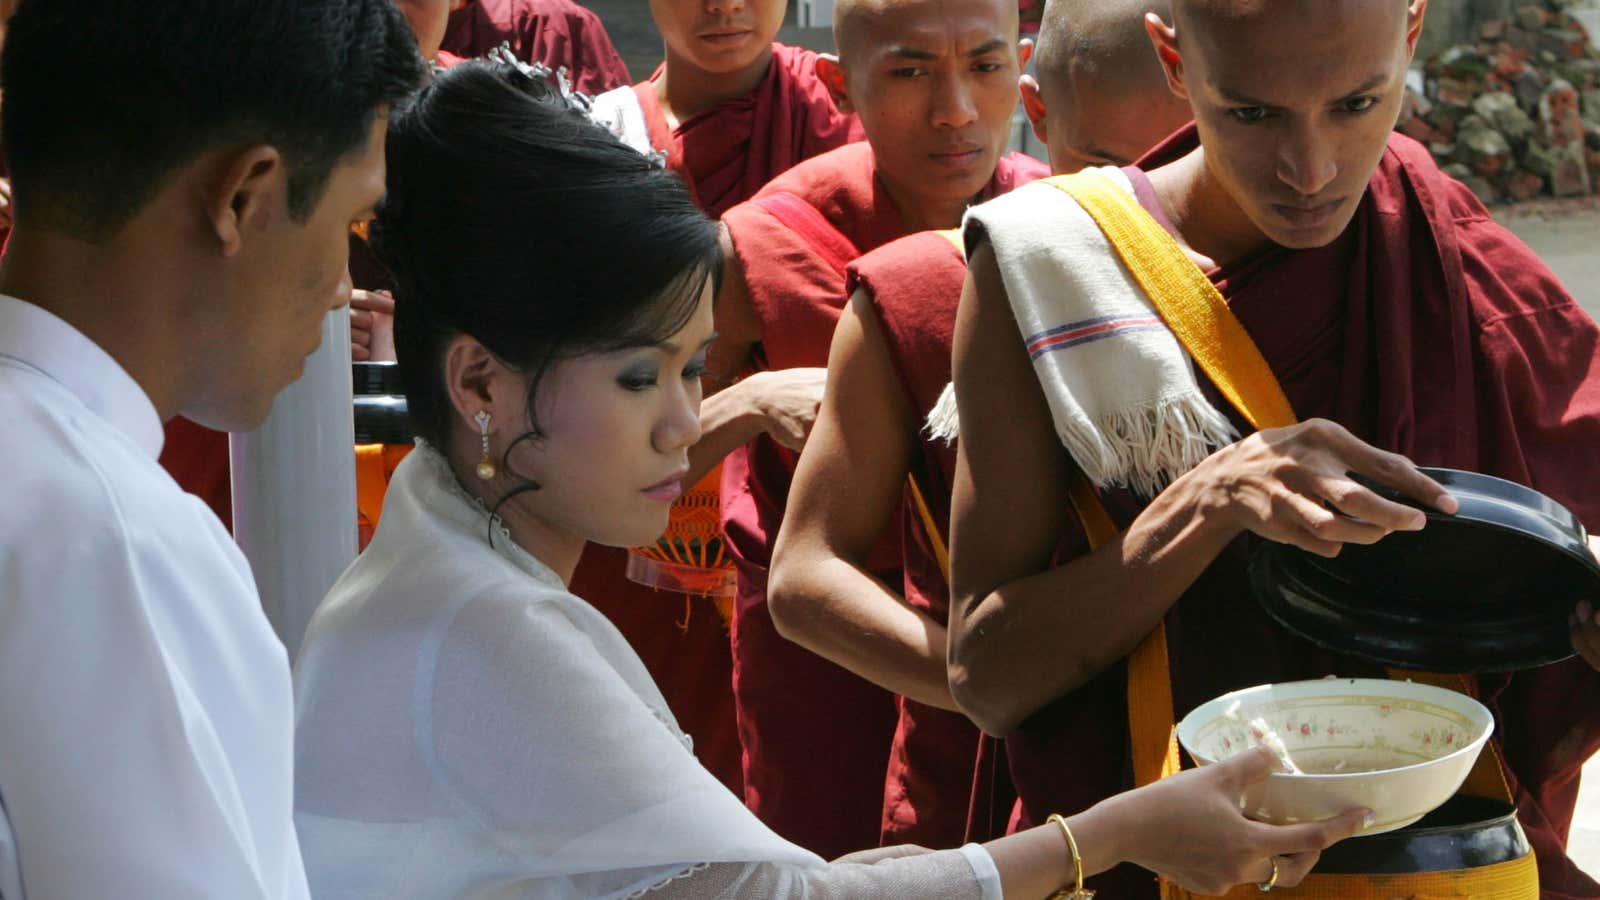 In Myanmar, sometimes monks and newlyweds don’t mix.